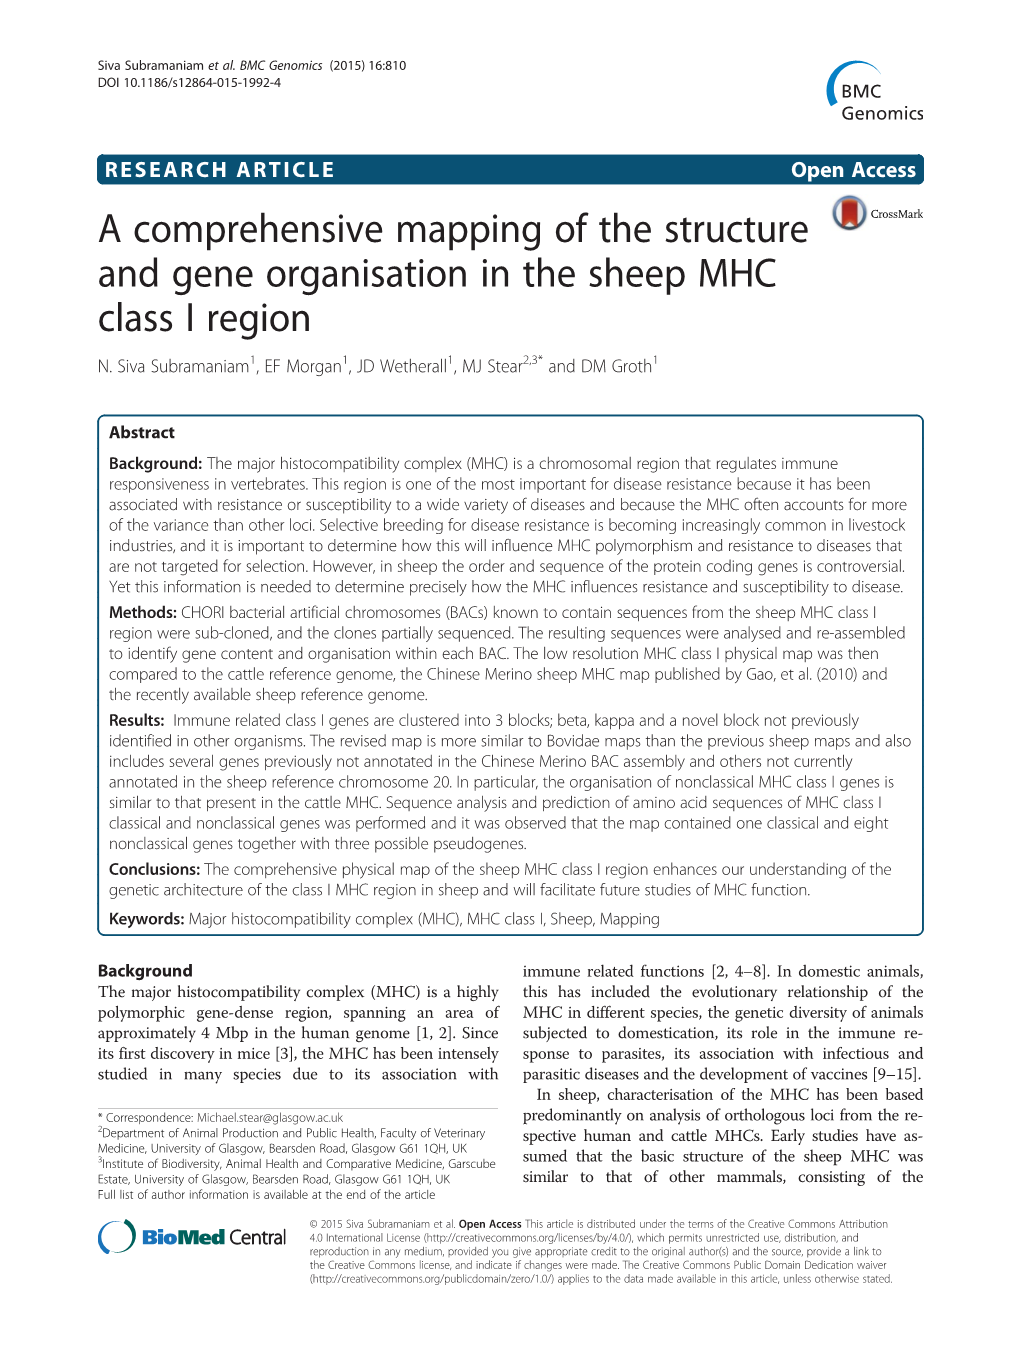 A Comprehensive Mapping of the Structure and Gene Organisation in the Sheep MHC Class I Region N